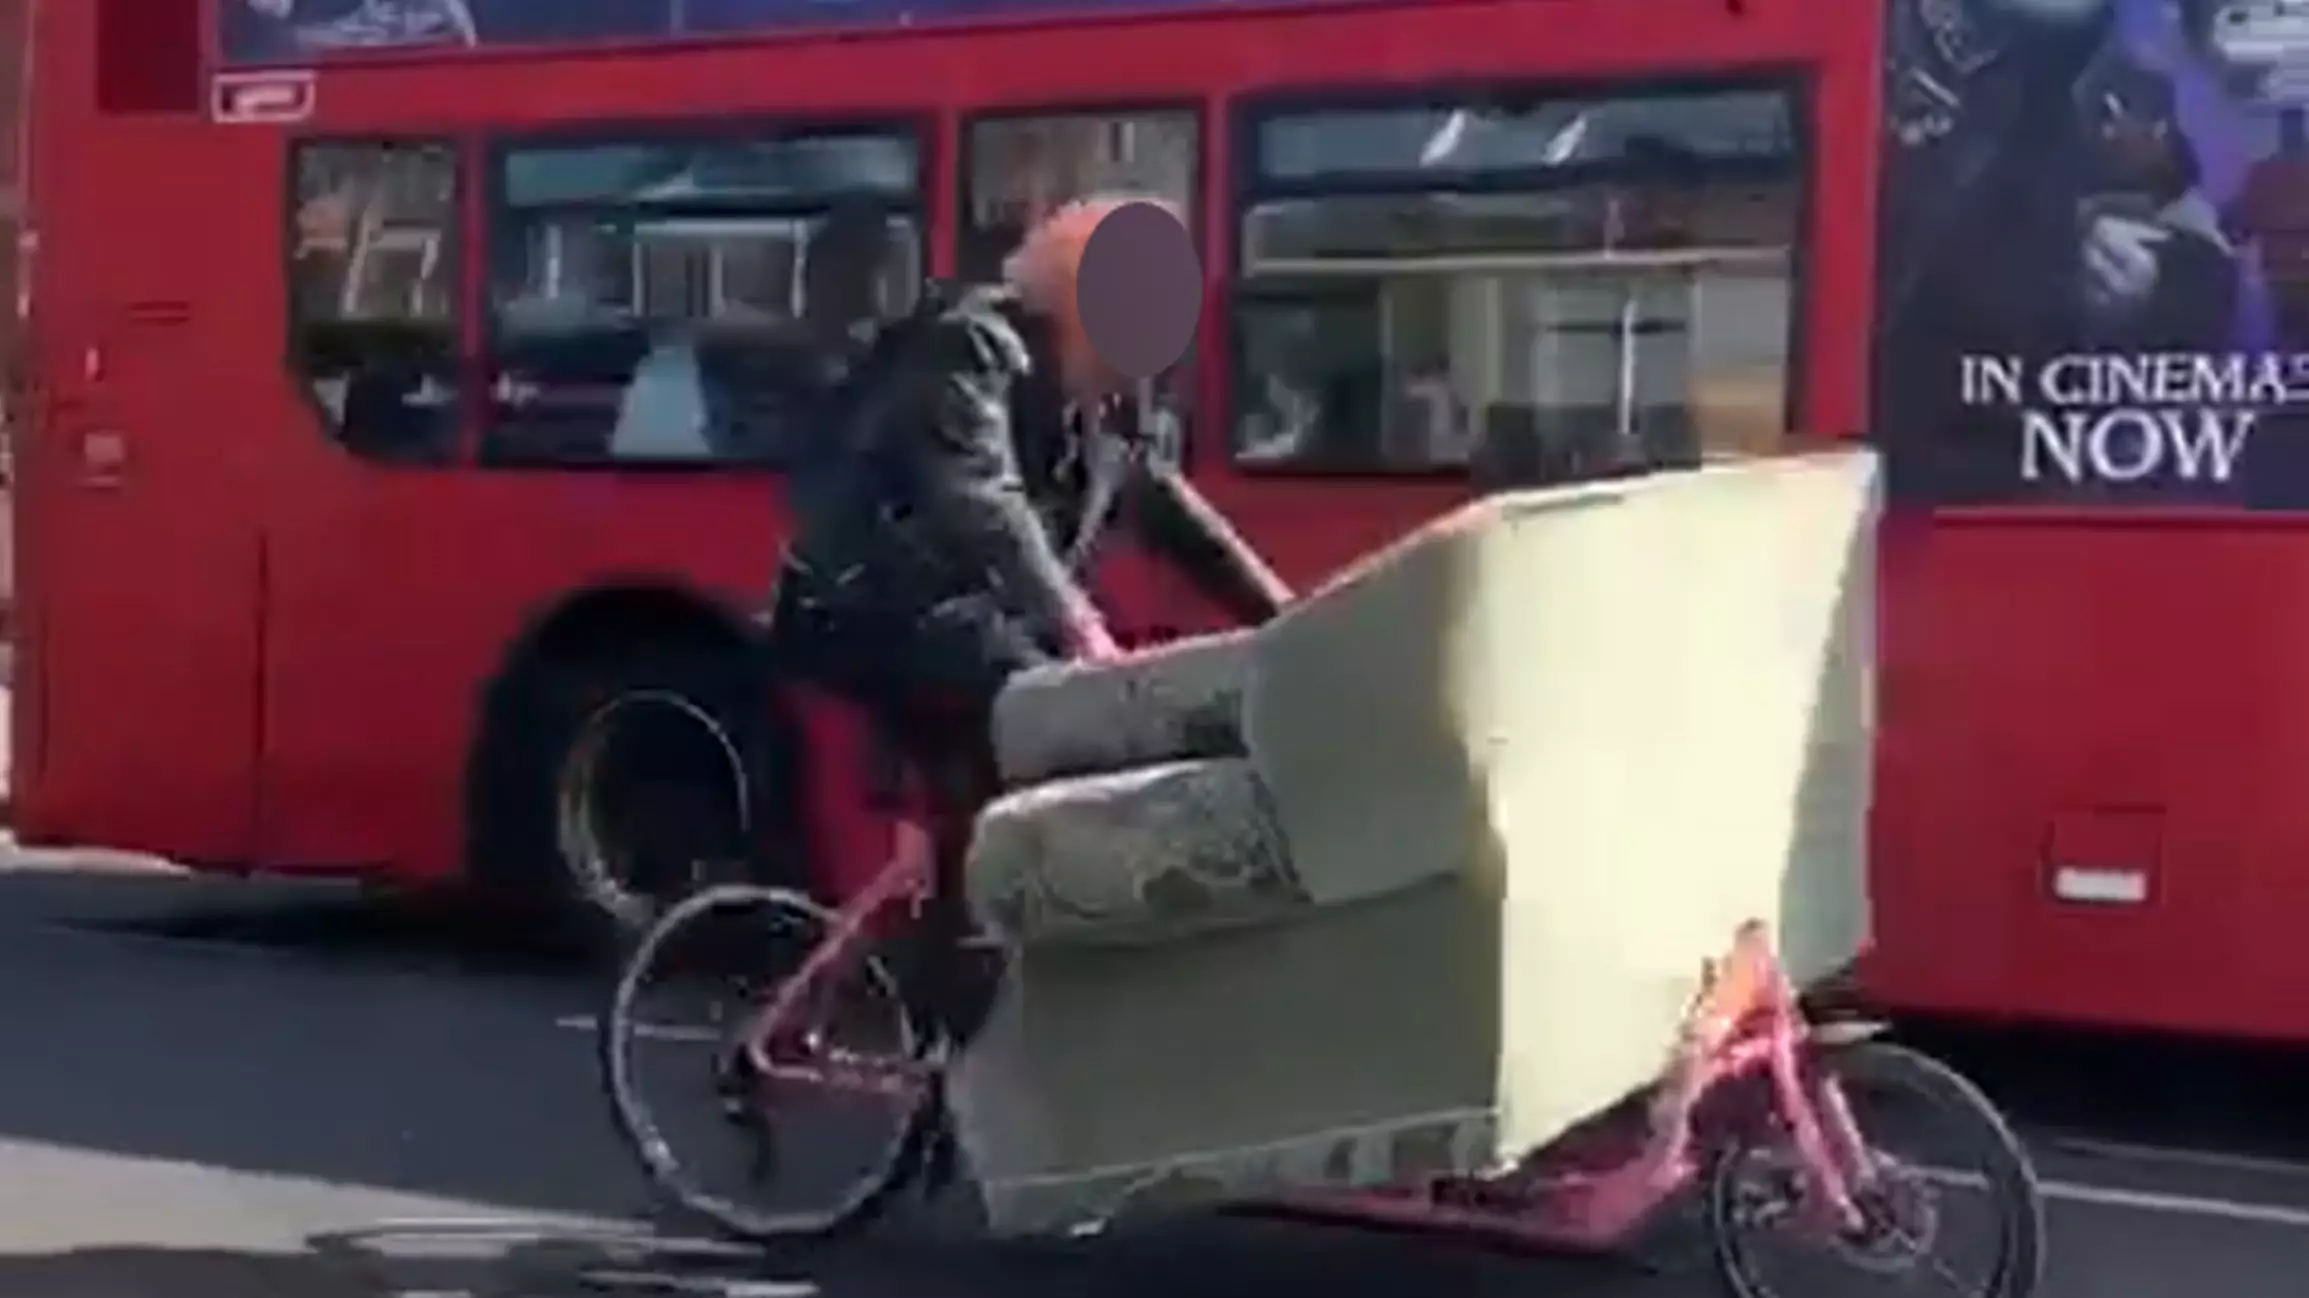 Cyclist Spotted Carrying Six-Foot Sofa On Bike In London